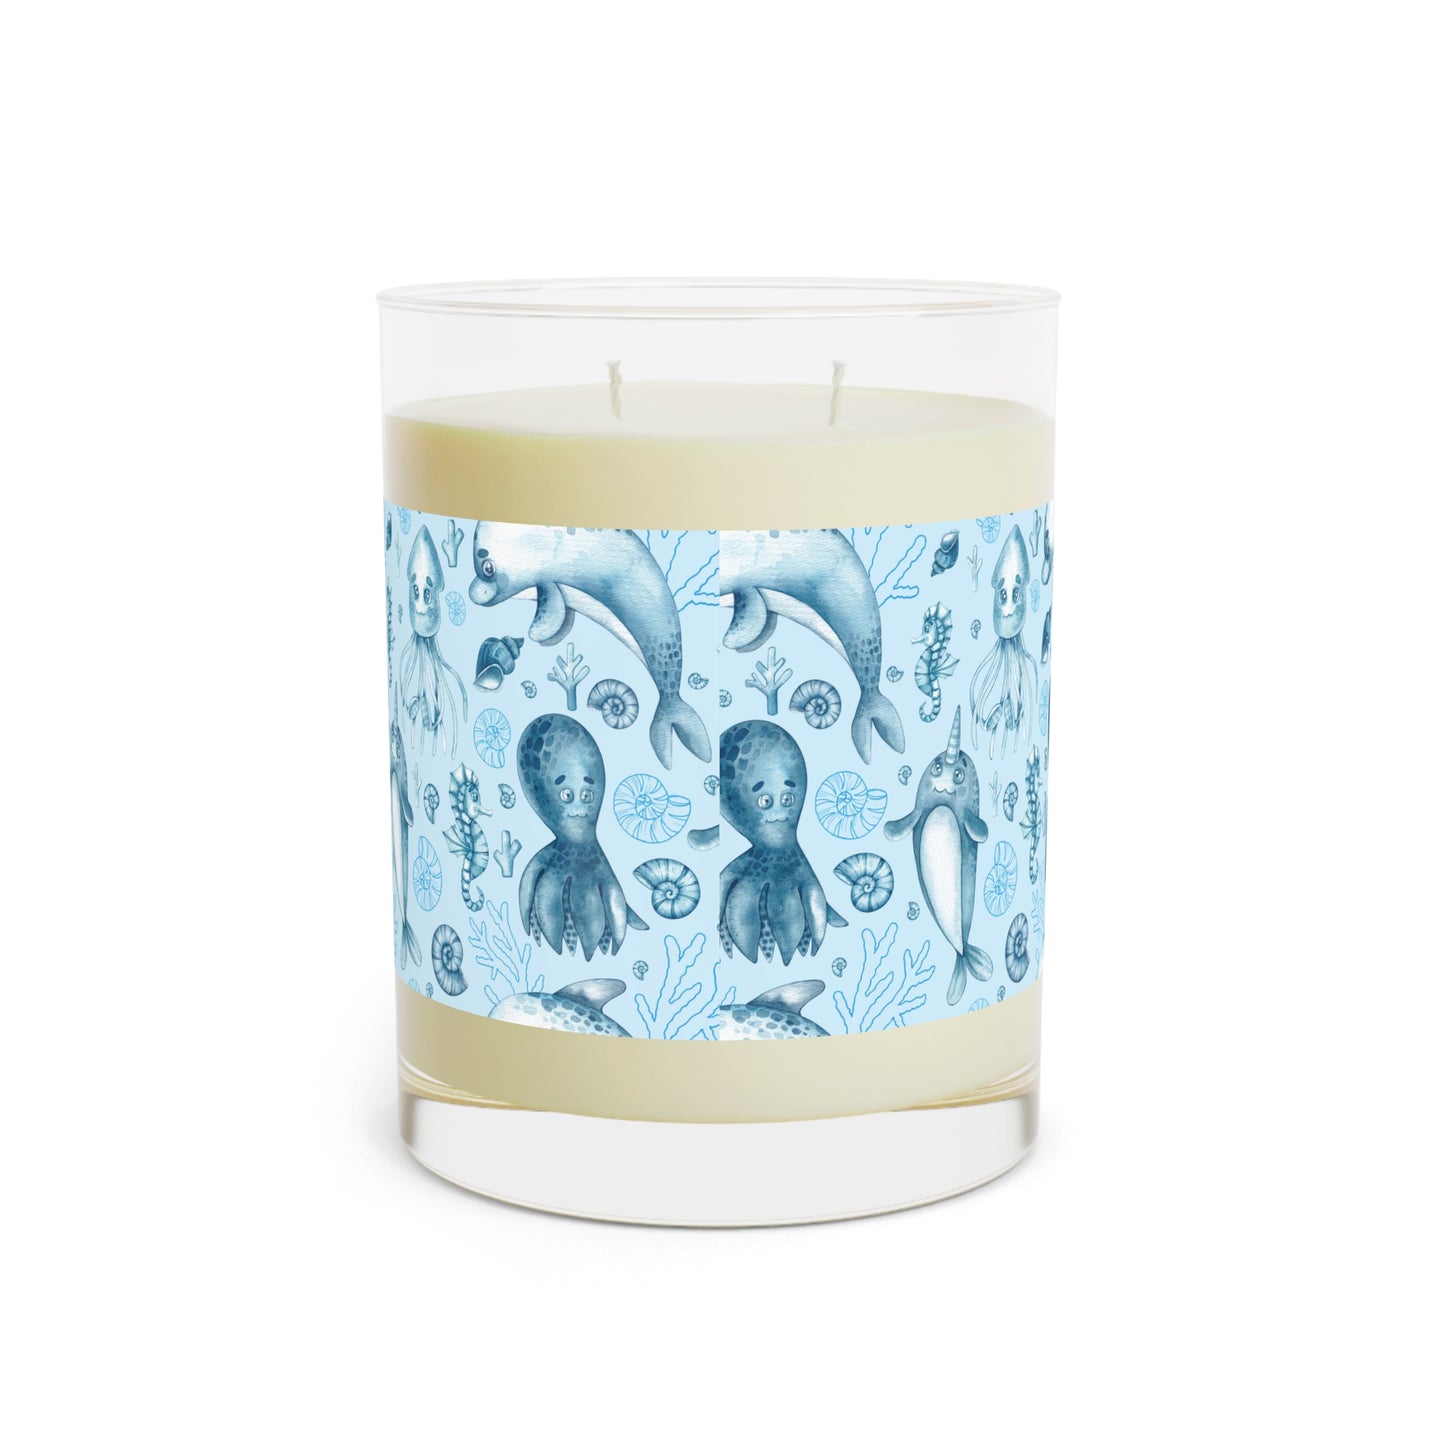 Ocean Lover Scented Soy Aromatherapy Candle